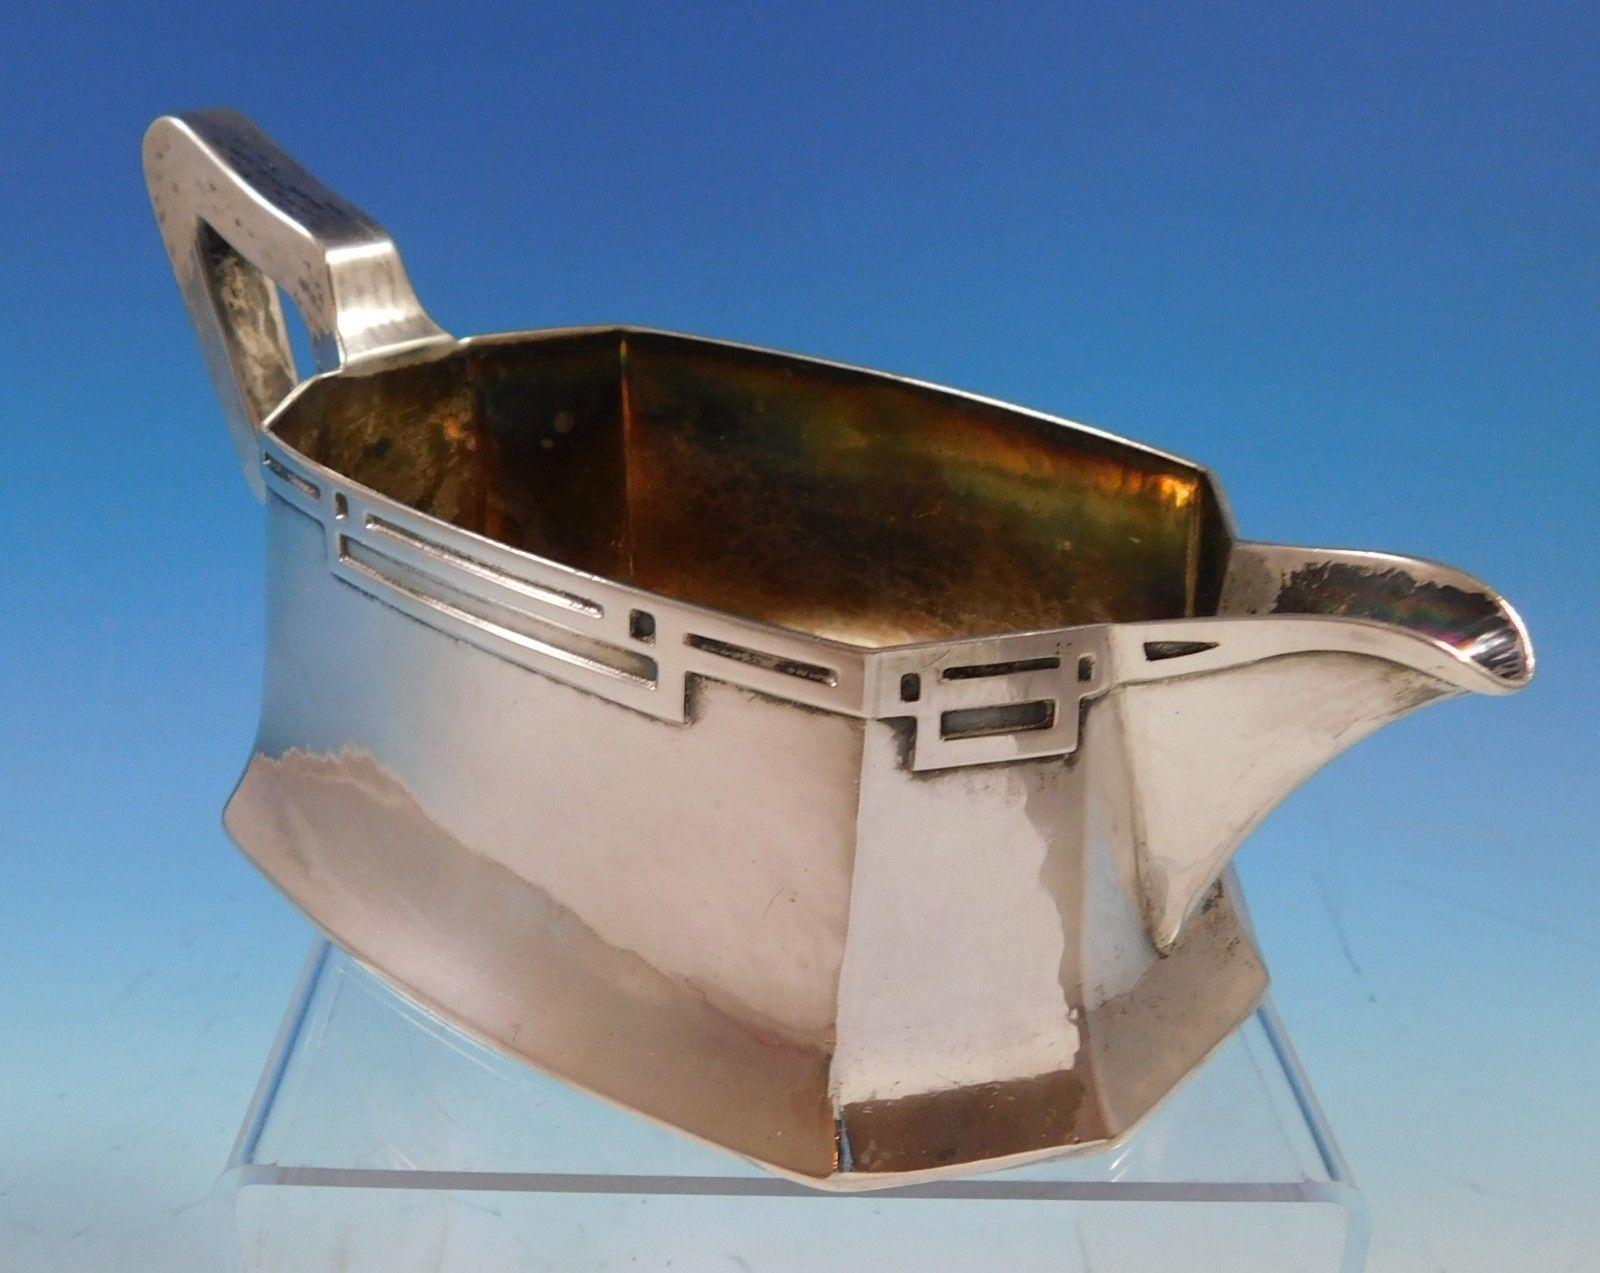 Arts & Crafts by Hallmark of NY
Arts & Crafts sterling silver gravy boat made by Hallmark of New York, circa 1900-1954. The gravy boat is handwrought with applied strapwork. The piece measures 3 1/2 x 8 3/4 x 4 1/4, and it weighs 9.98 ozt. It is